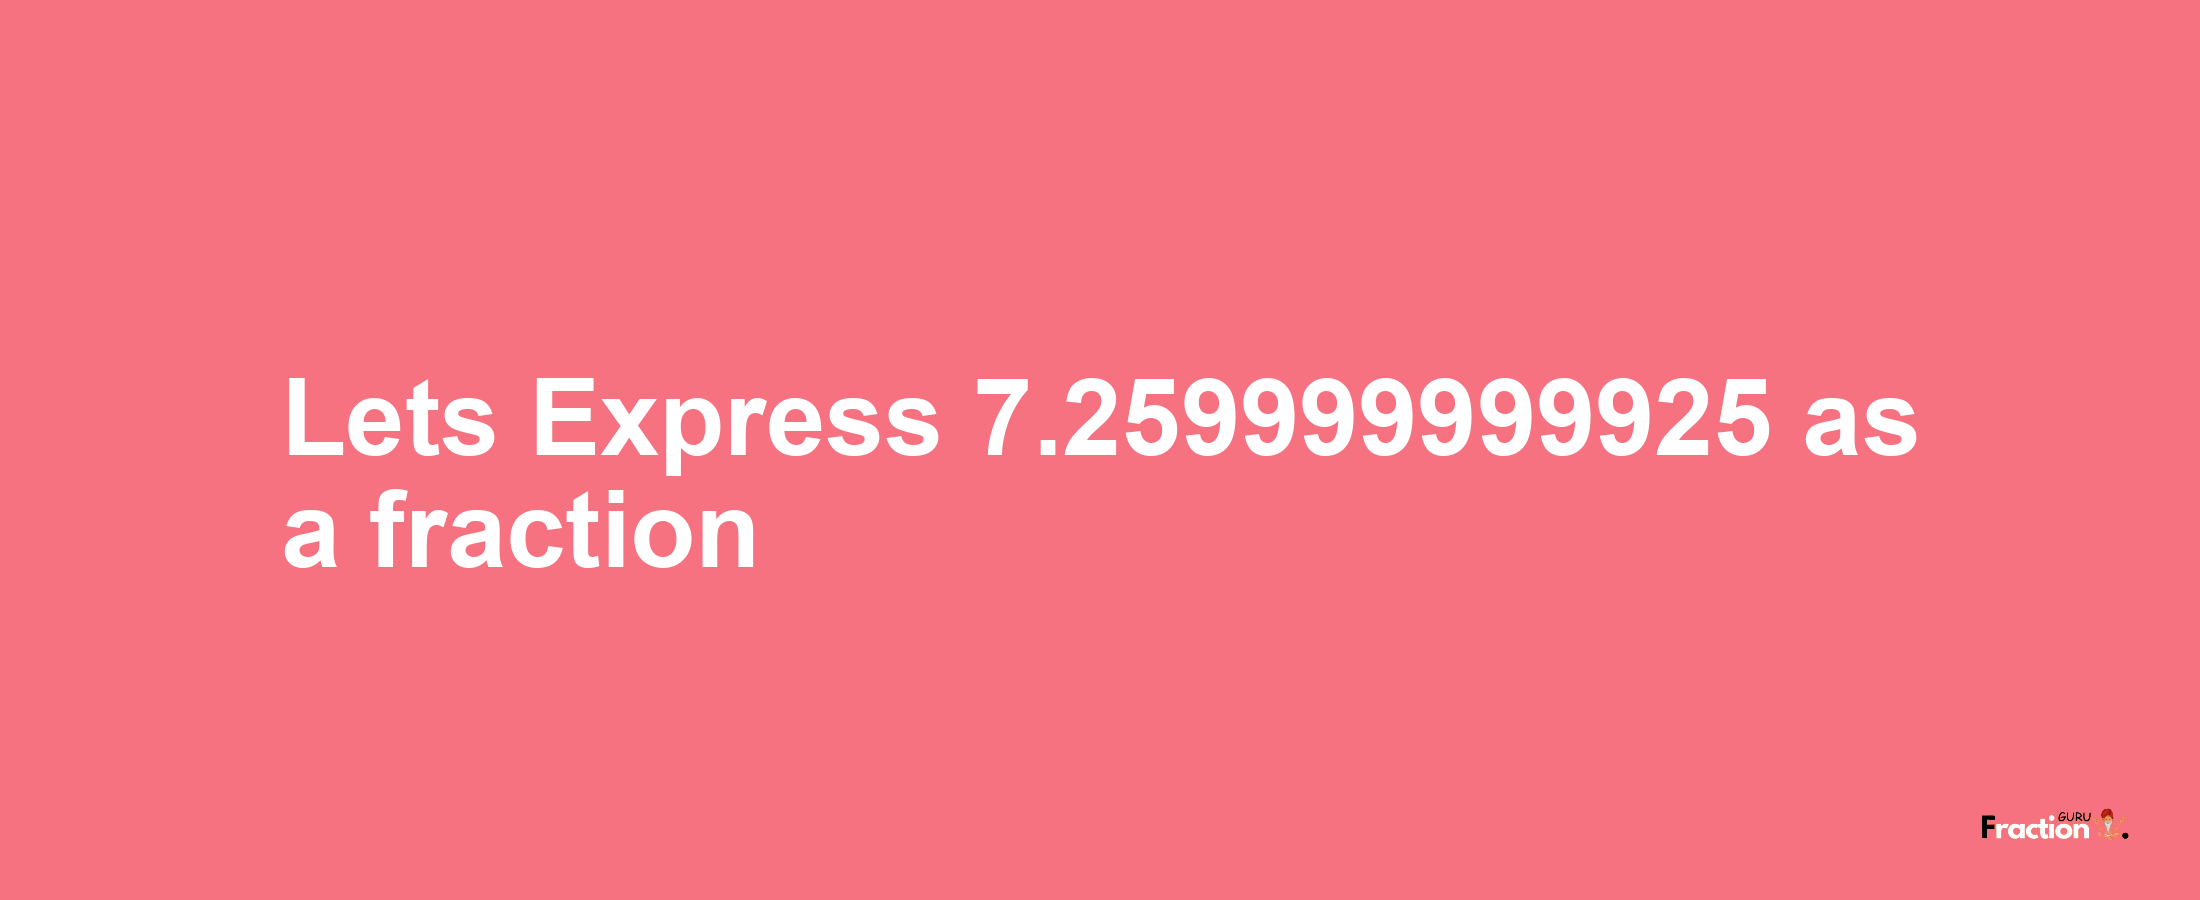 Lets Express 7.259999999925 as afraction